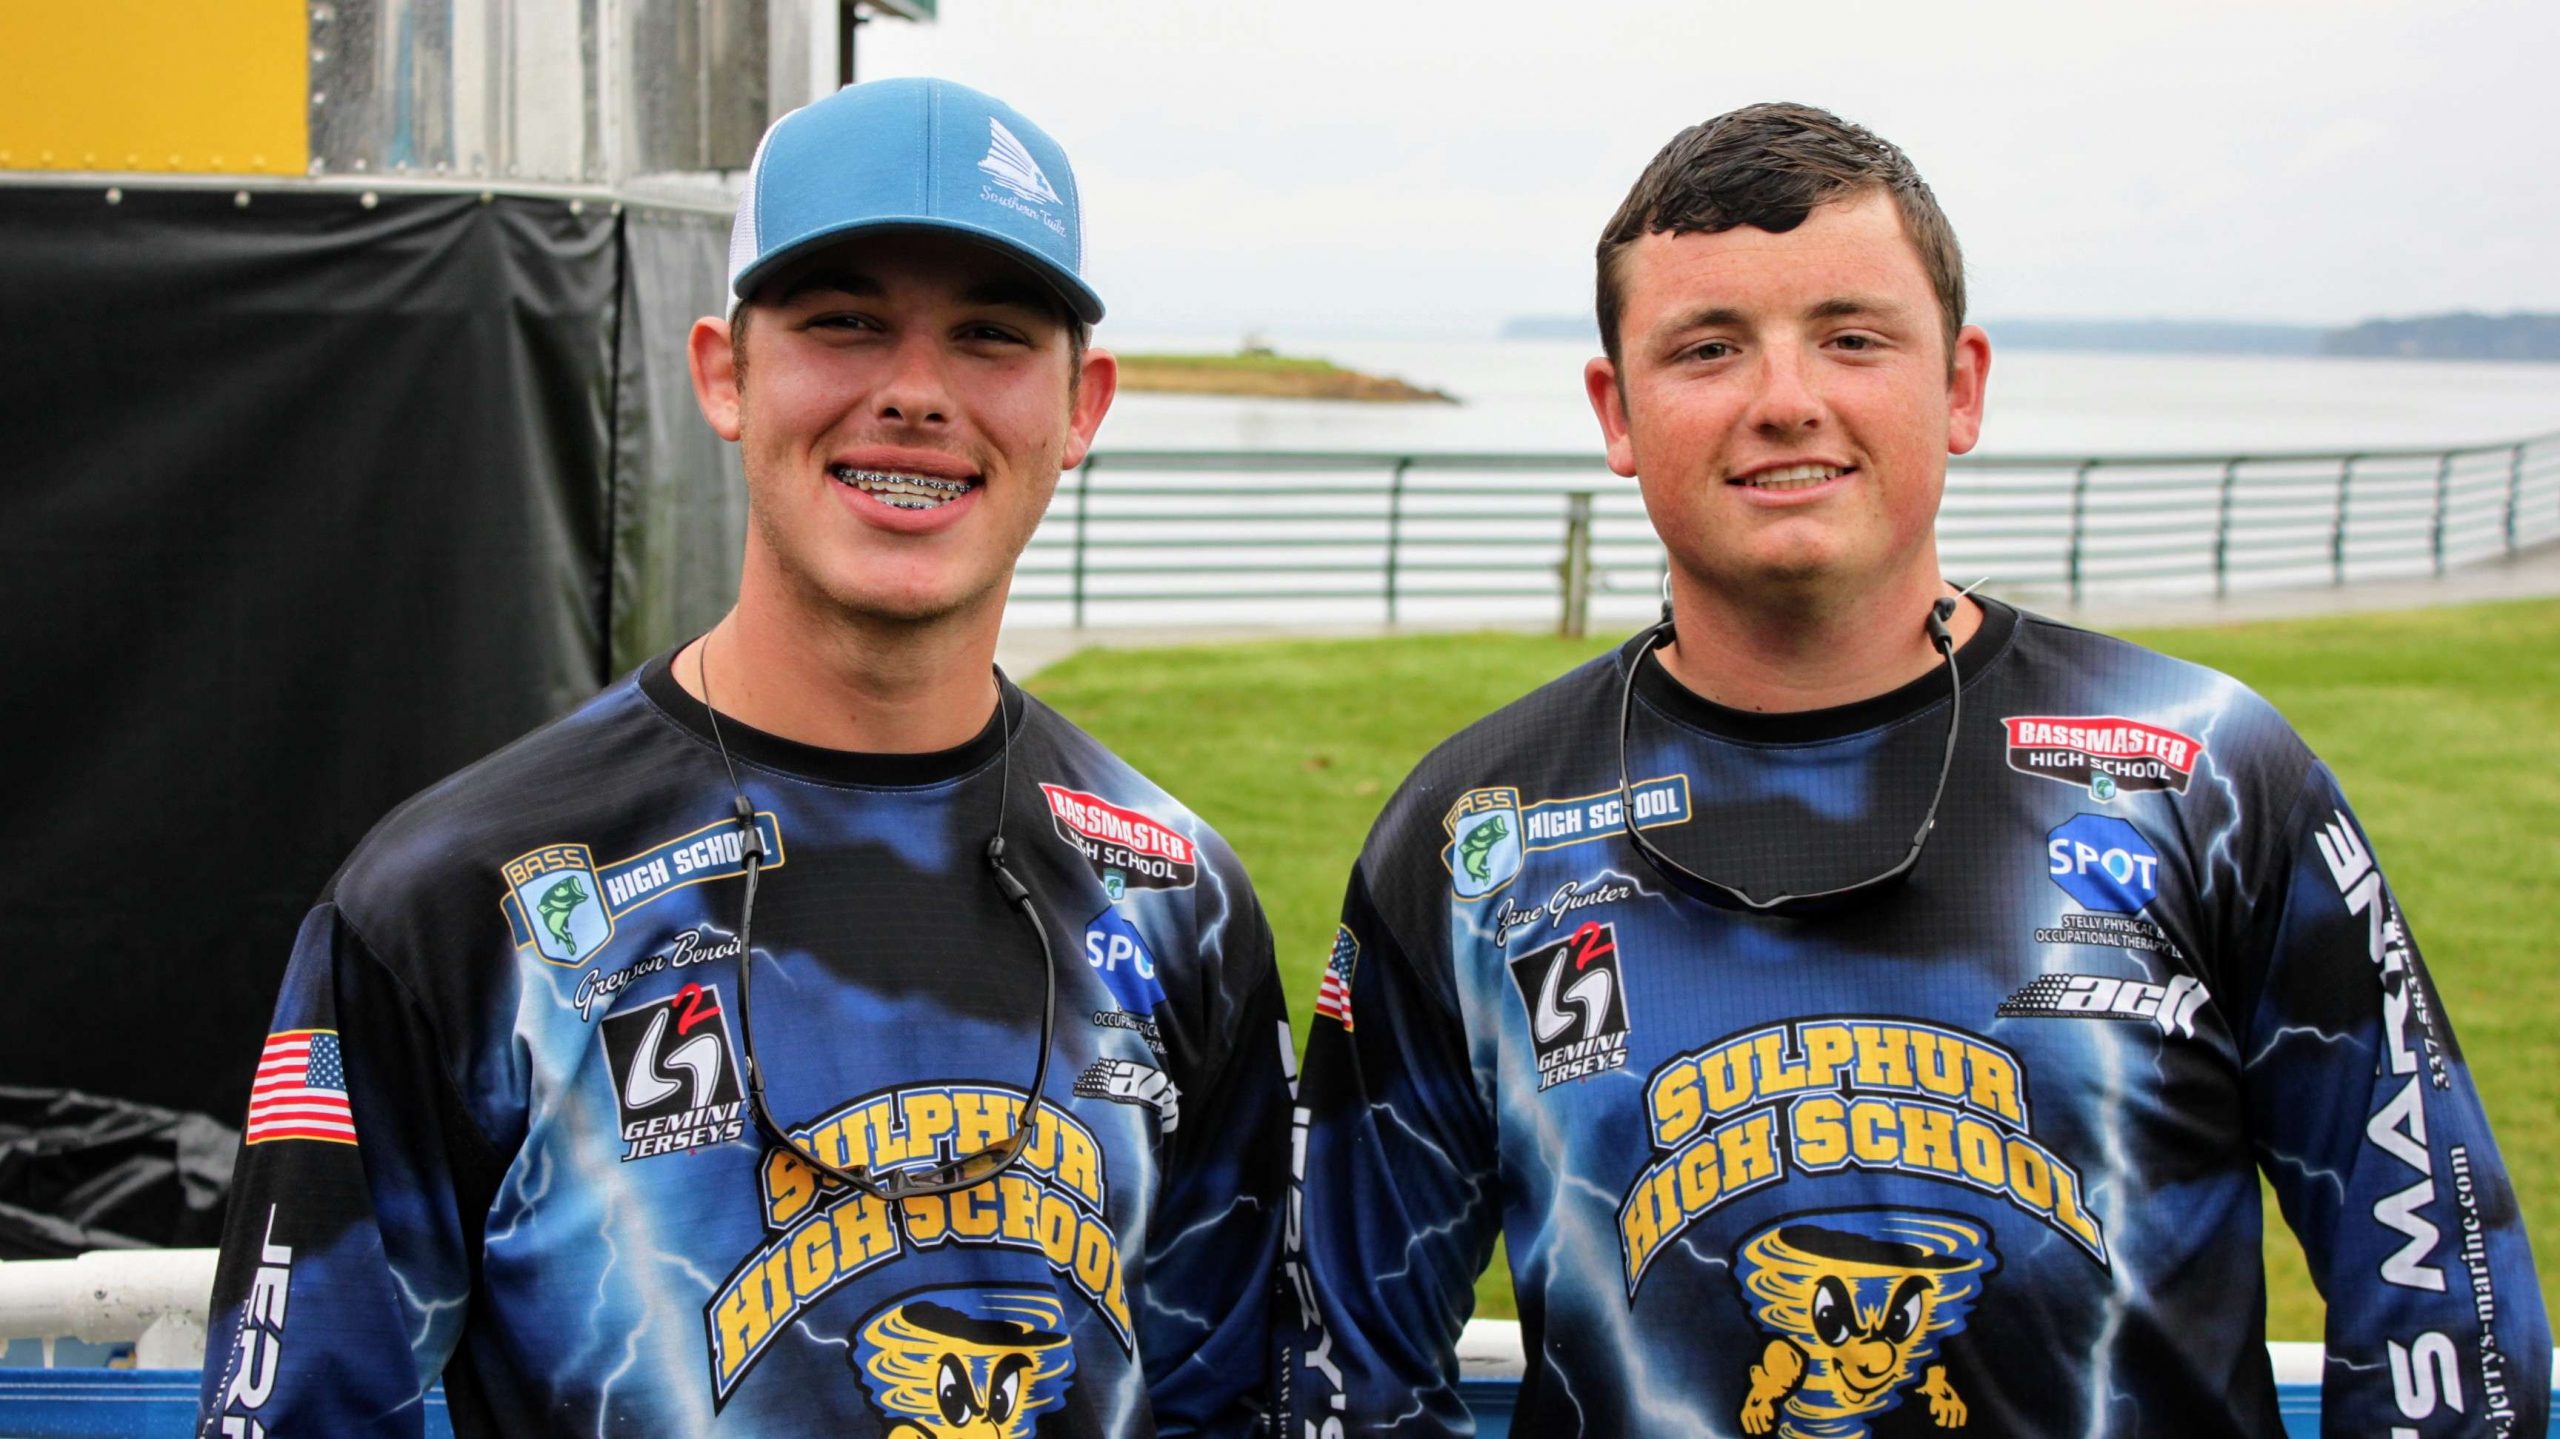 There was a tie for 18th place, so both squads earned entry into
  the national tournament. Here are Sulphur (La.) High School's Greyson
  Benoit and Zane Gunter who had a limit of 14-5.
